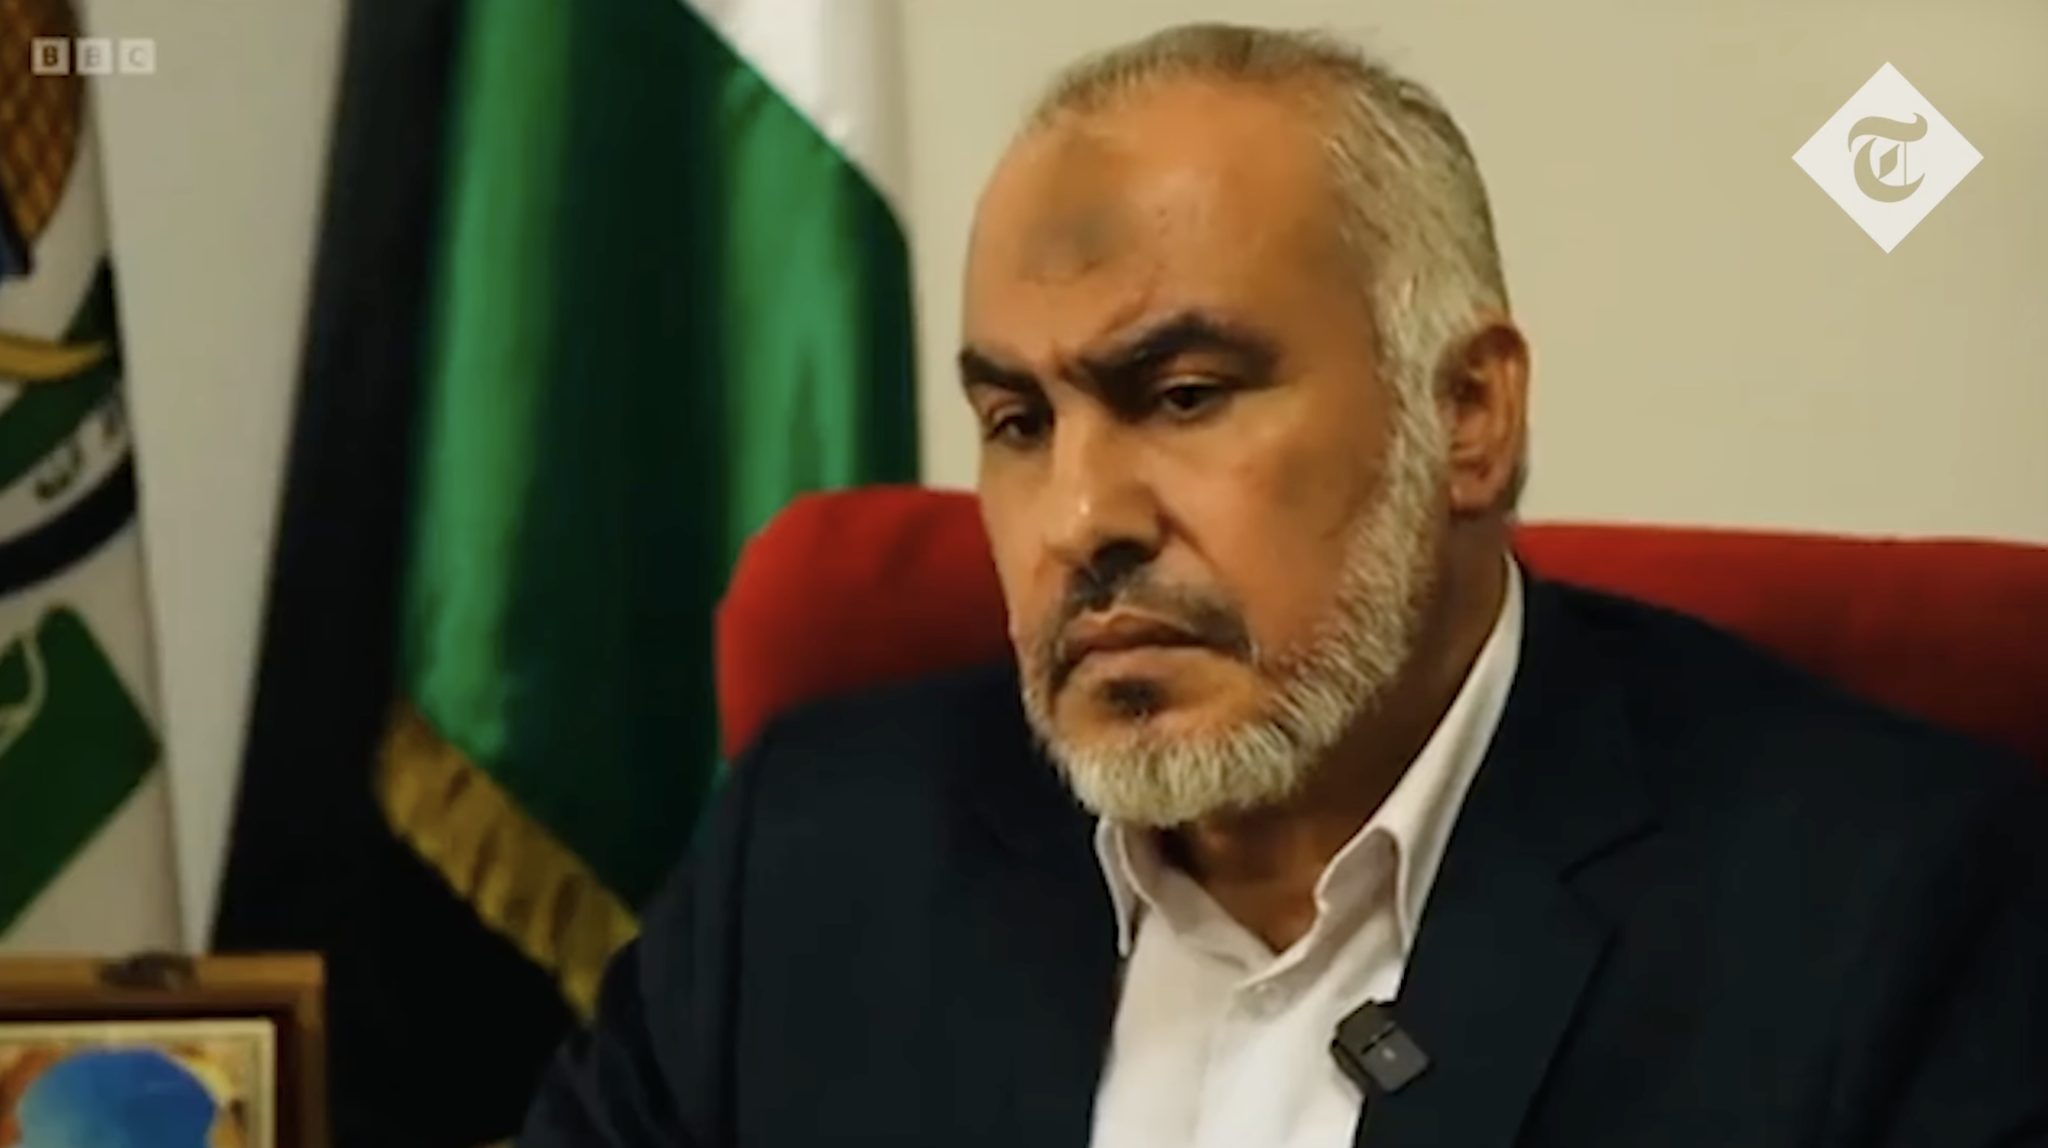 Hamas Official Storms Out Of Bbc Interview When Asked About Terror Groups Heinous War Crimes